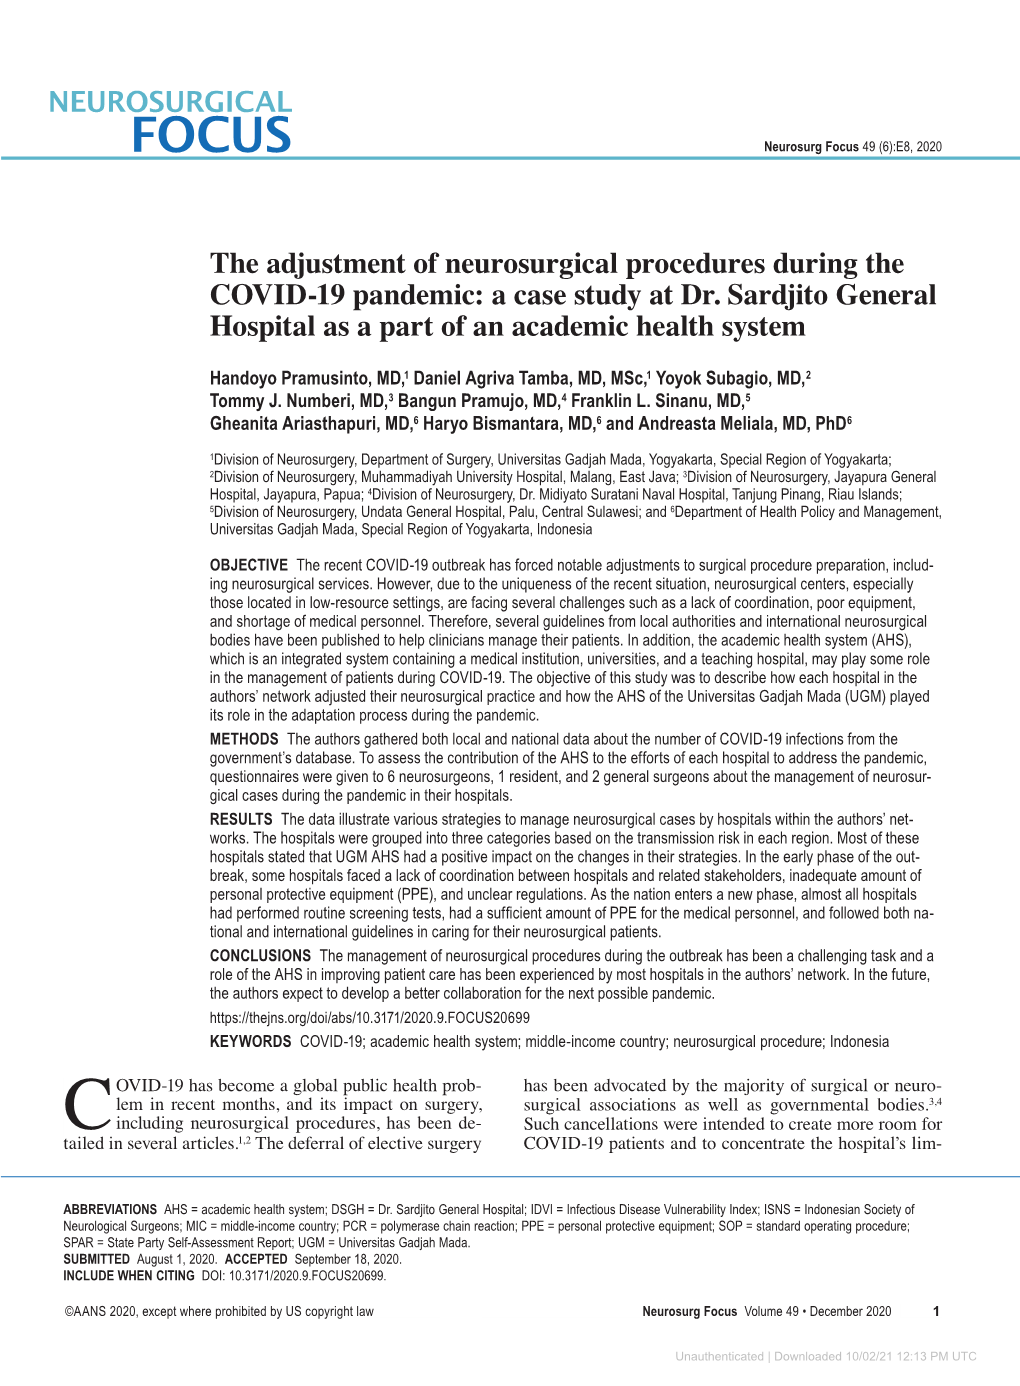 The Adjustment of Neurosurgical Procedures During the COVID-19 Pandemic: a Case Study at Dr